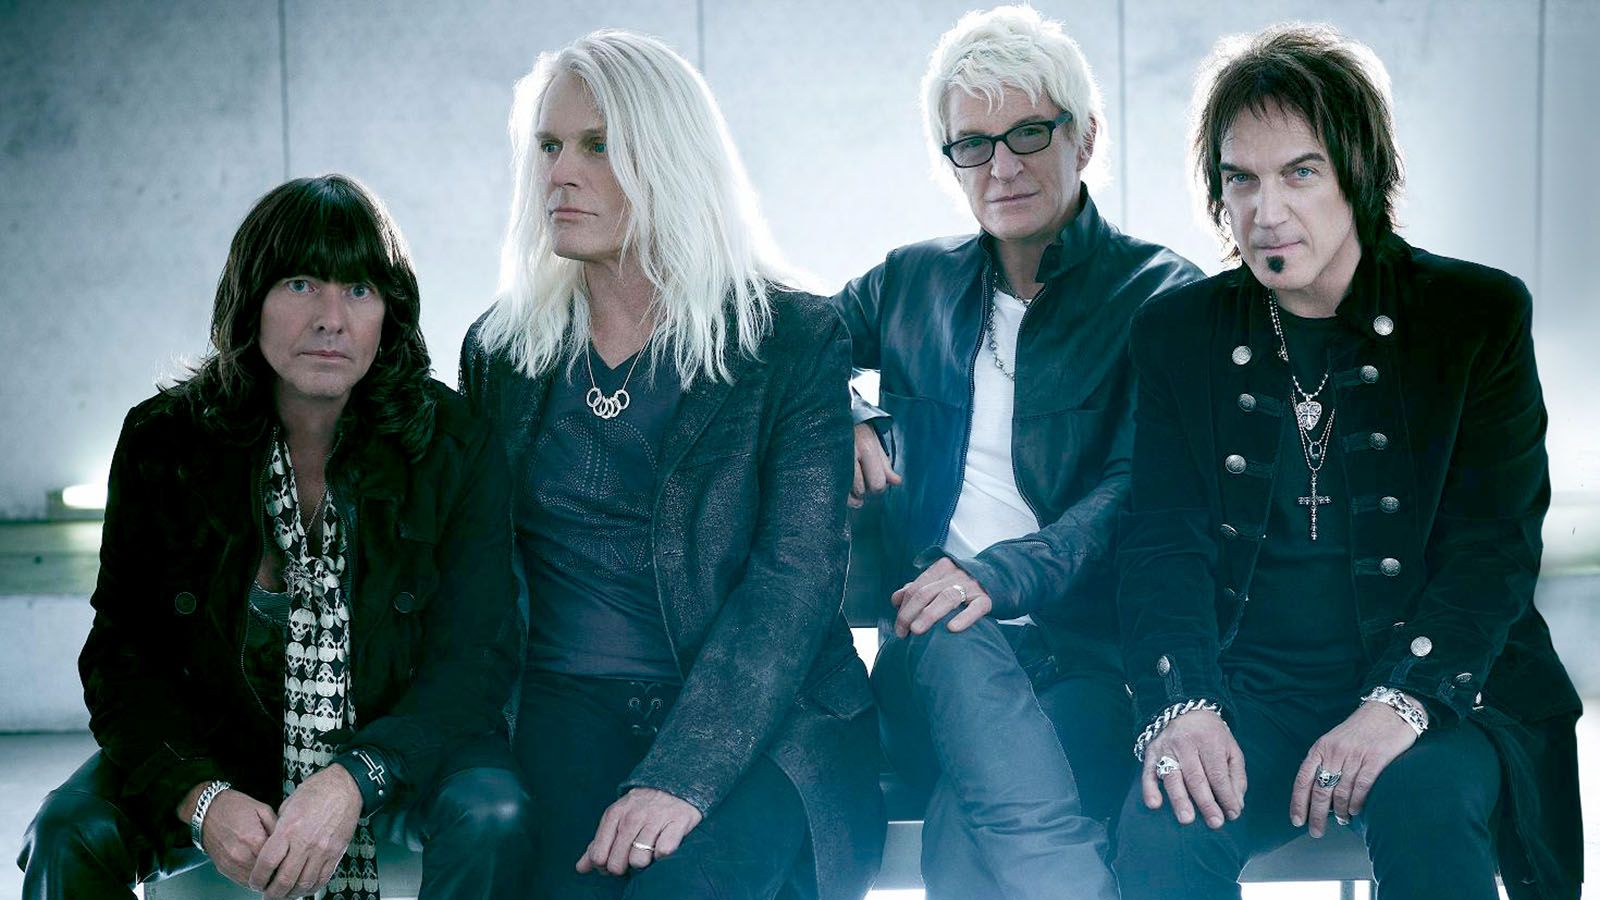 REO Speedwagon will be at Foellinger Theatre on Tuesday, Sept. 5.